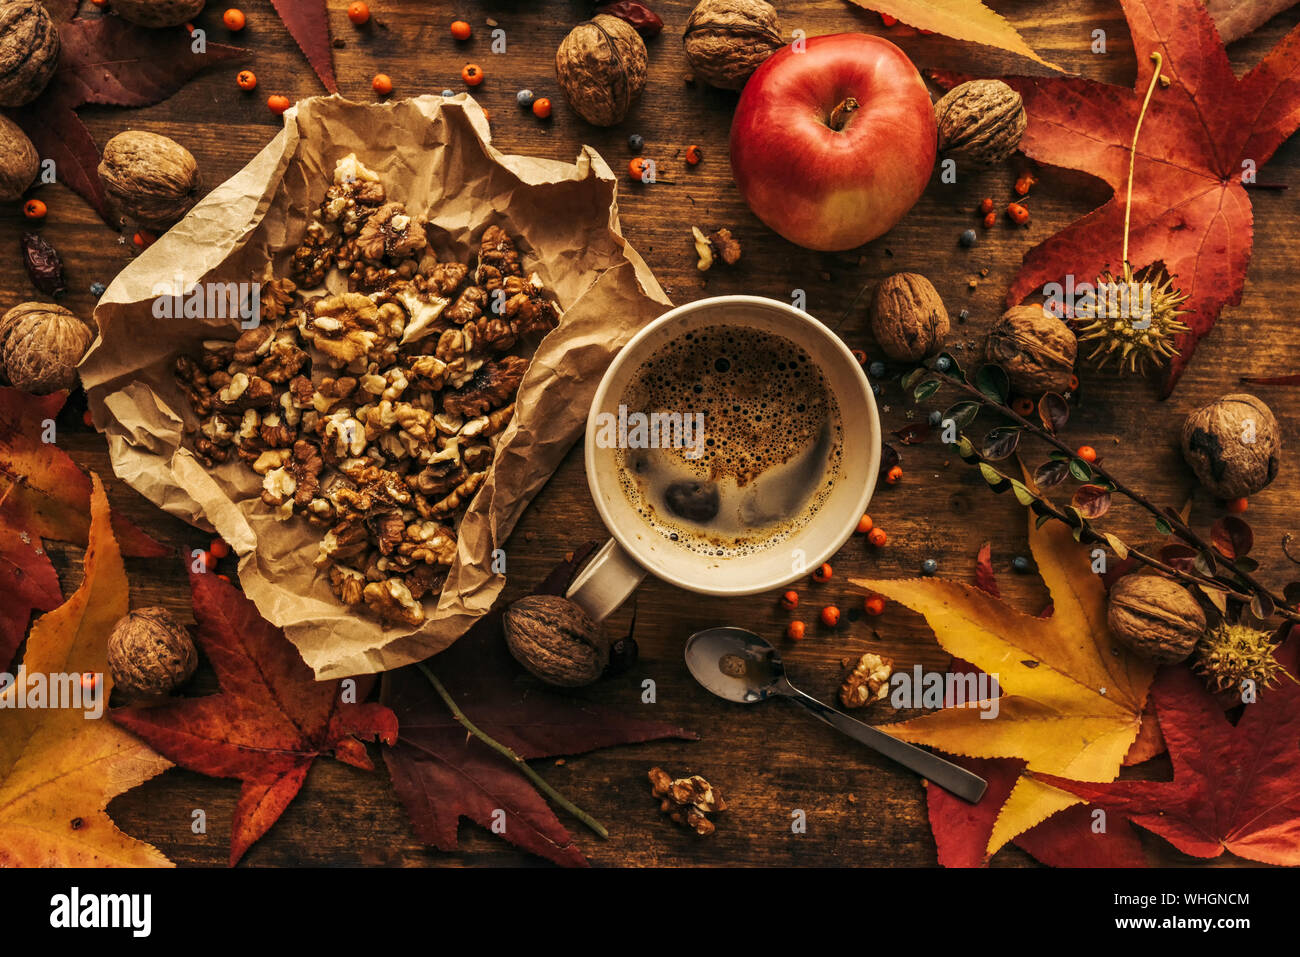 Enjoying fruits of autumn - apple, coffee and walnut on table for Thanksgiving day concept top view Stock Photo